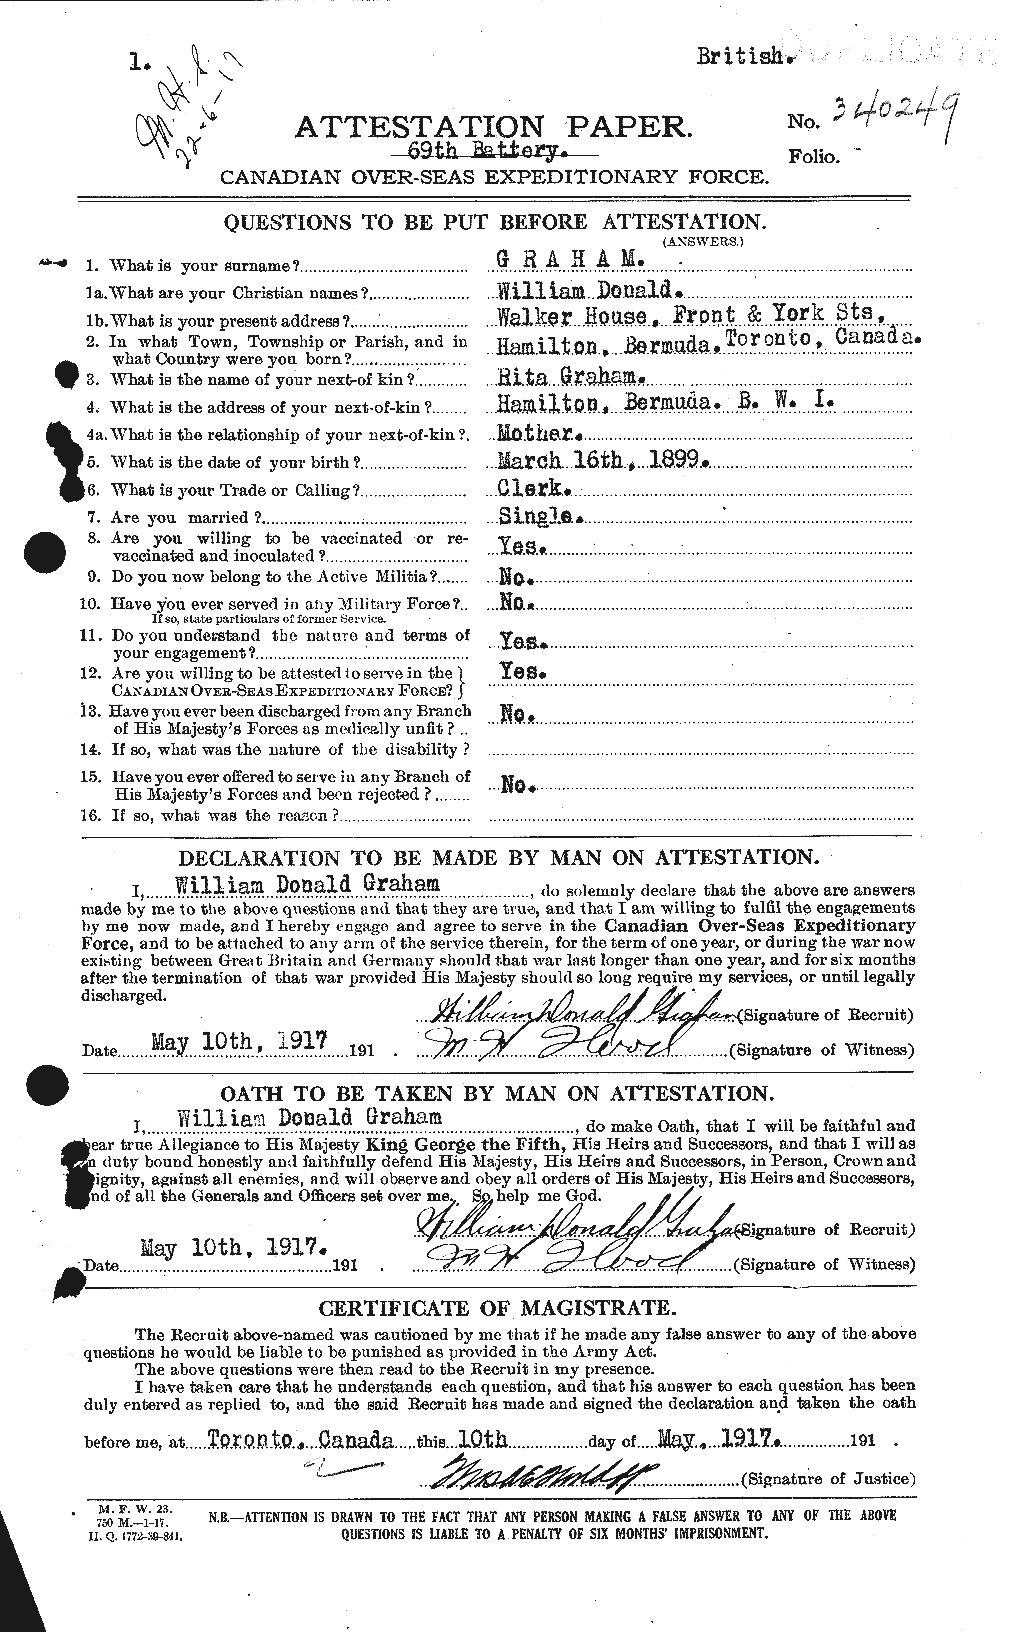 Personnel Records of the First World War - CEF 357980a